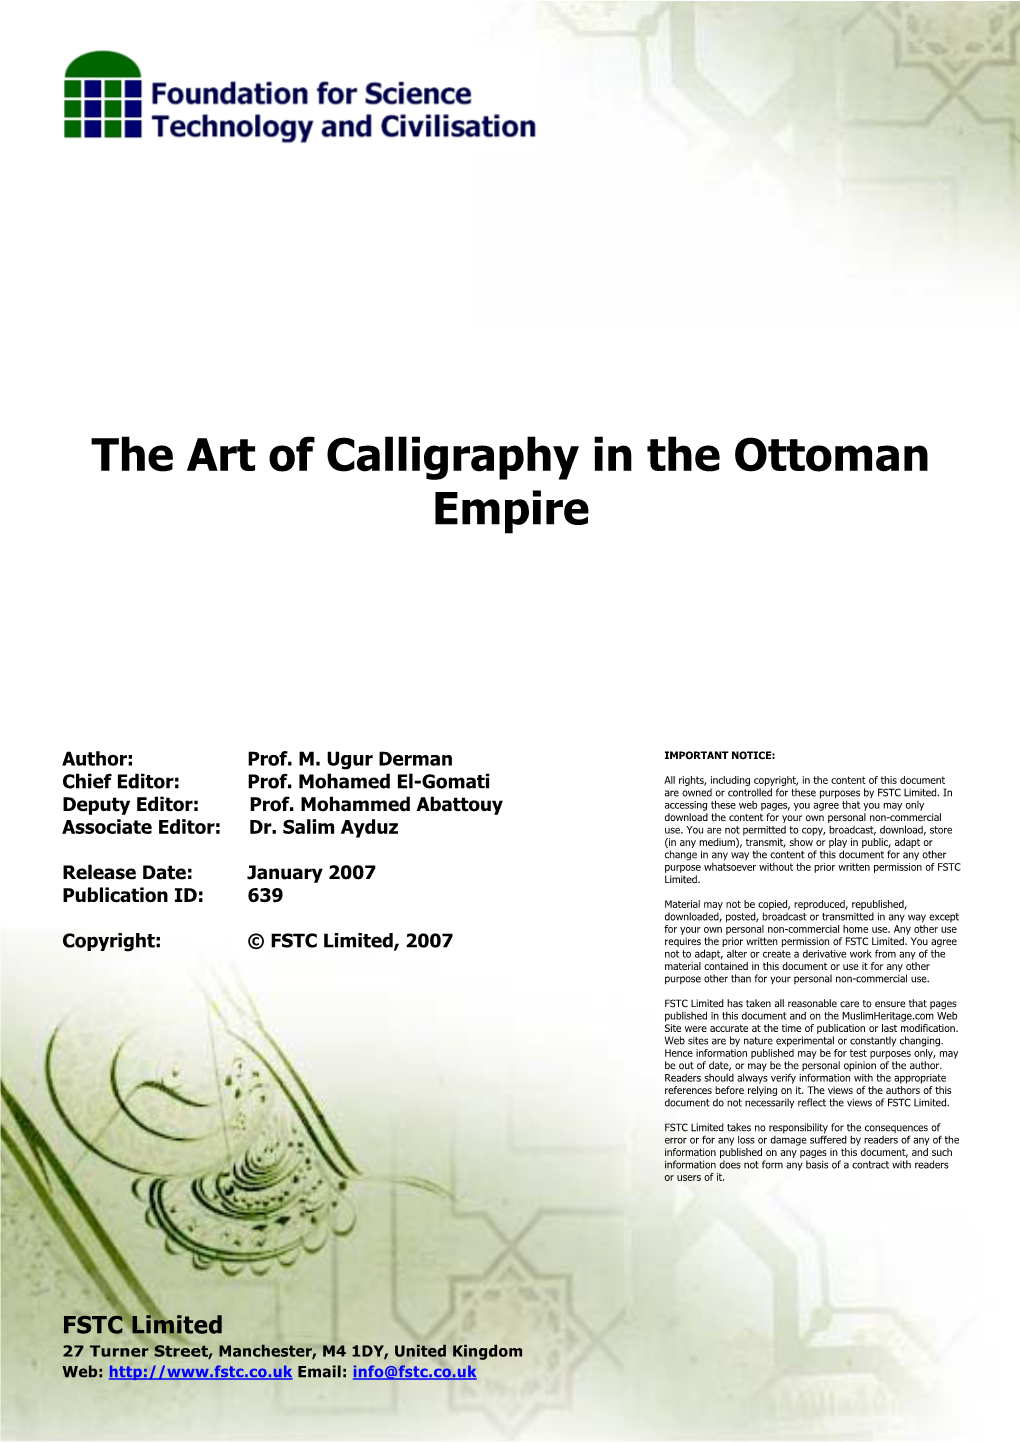 The Art of Calligraphy in the Ottoman Empire